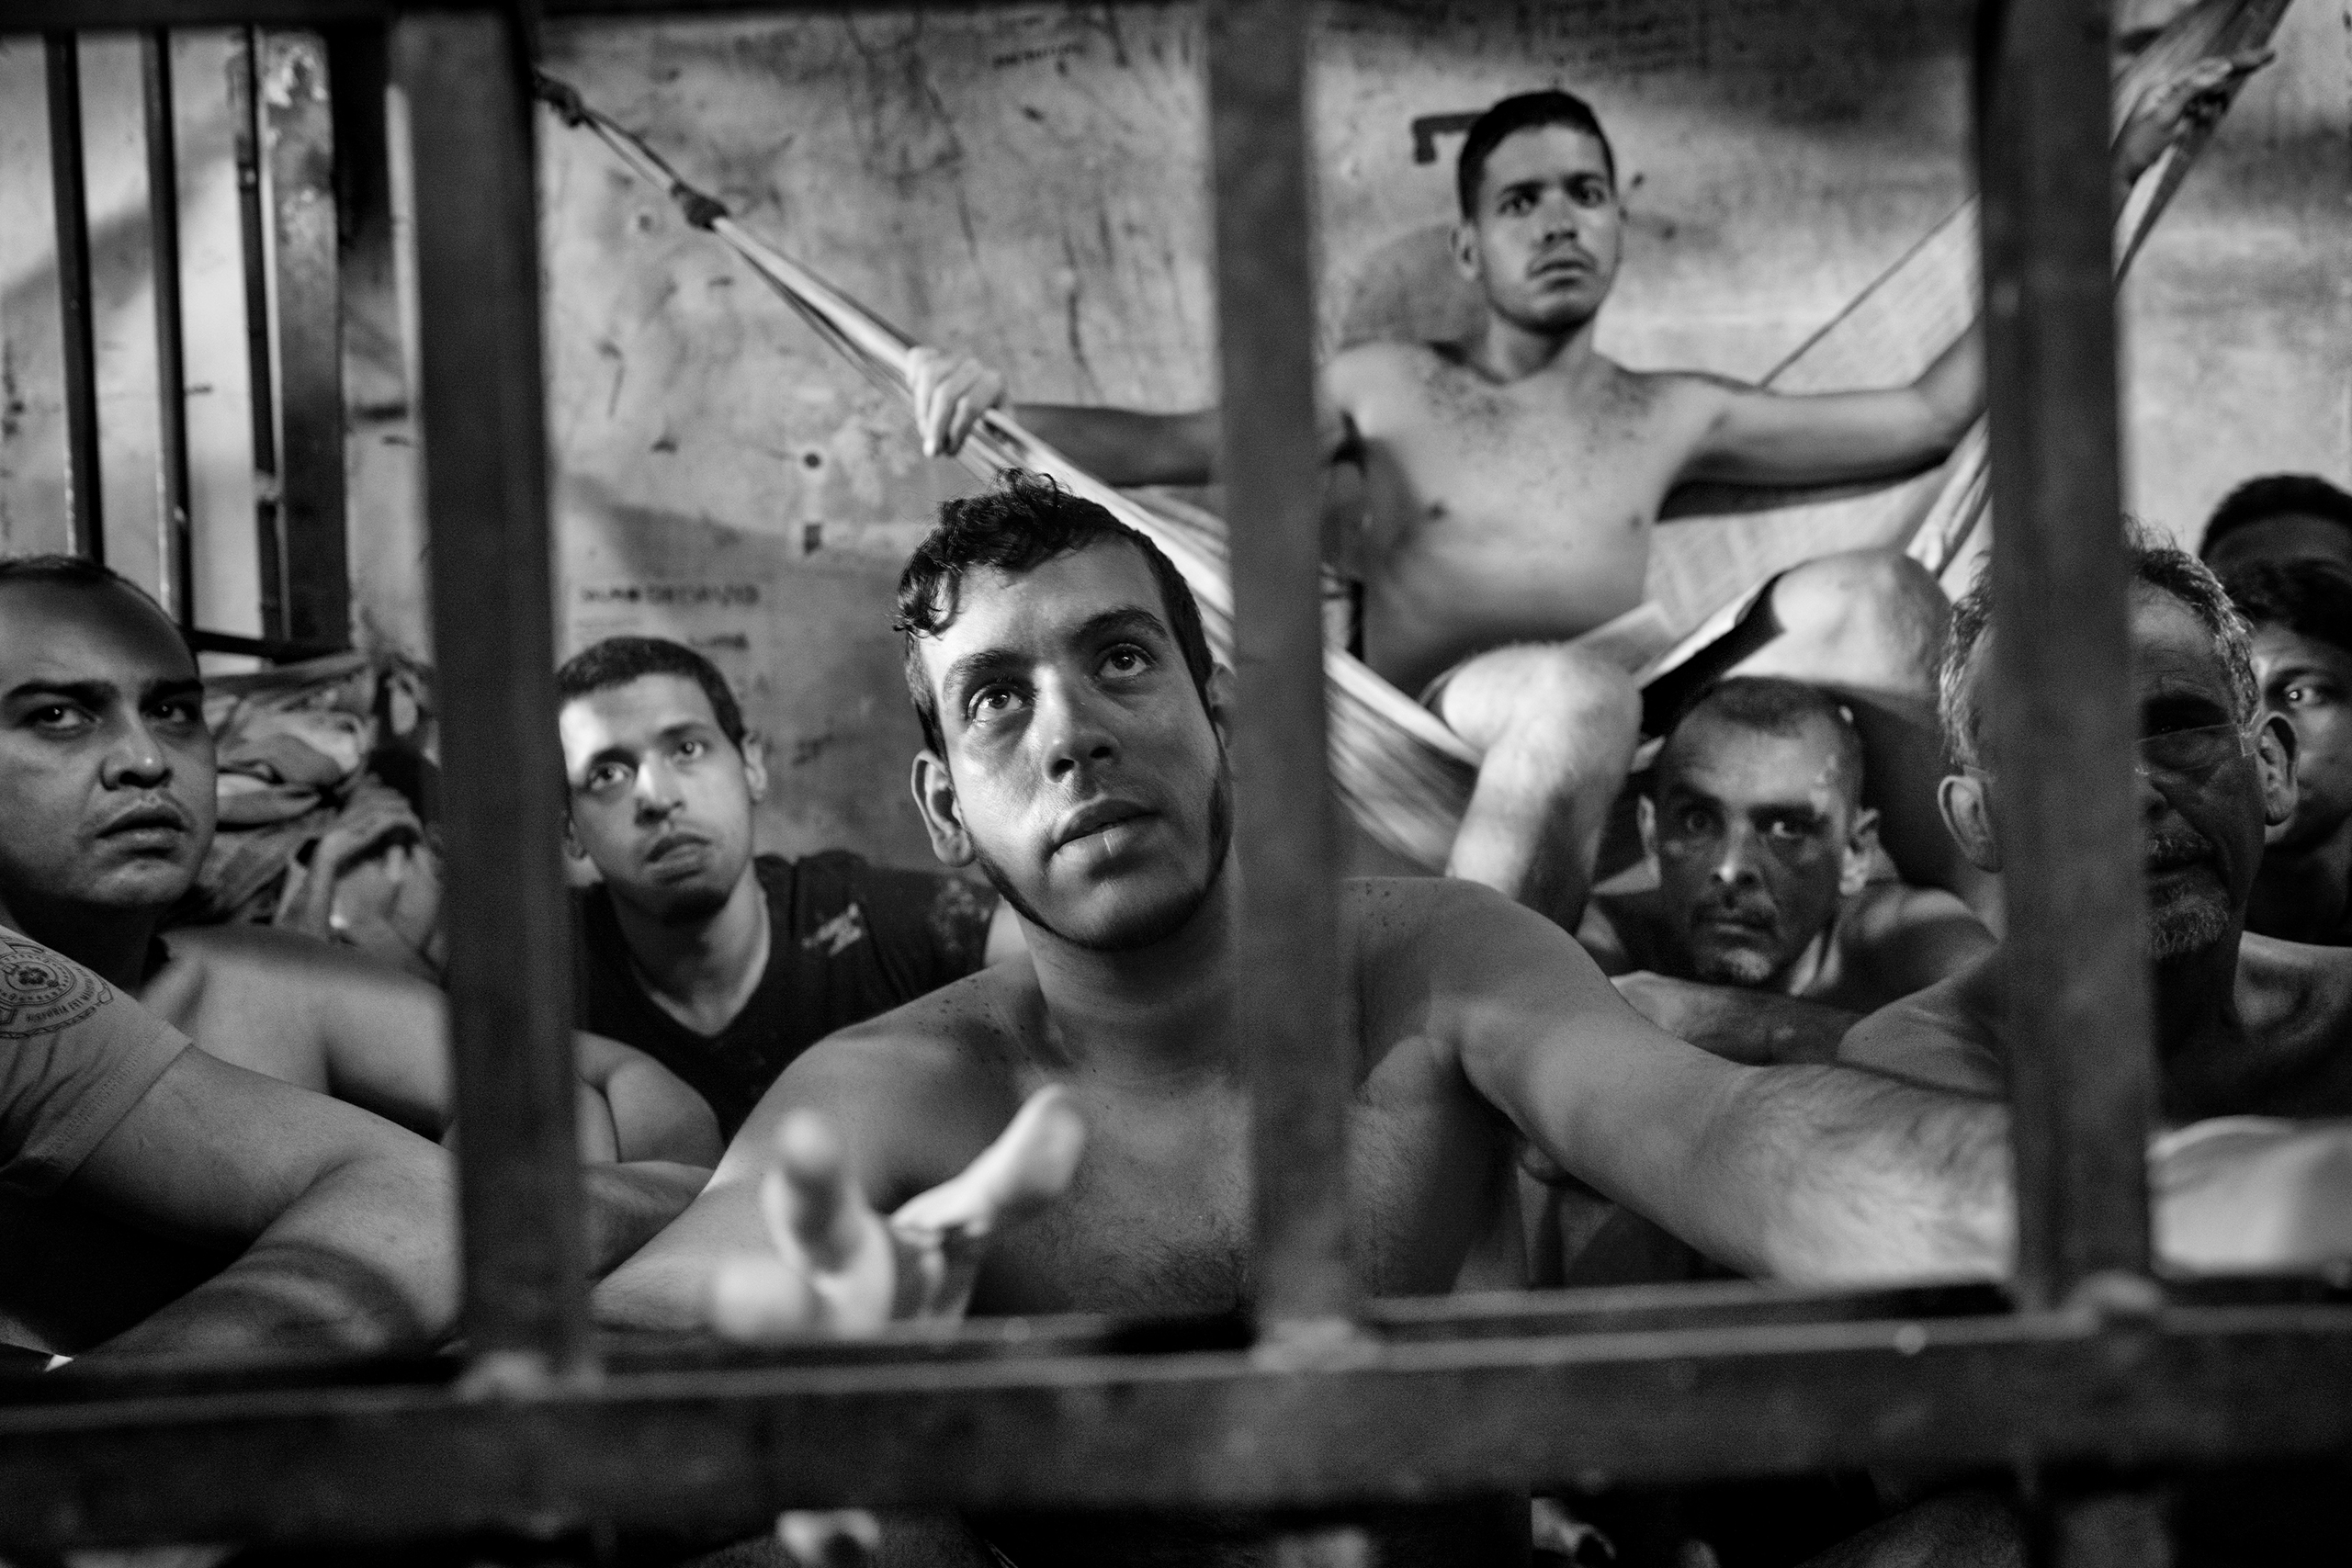 A group of prisoners sit in their cells inside the municipal police station of Chacao, located east of Caracas, Venezuela, May 27, 2016. (Alvaro Ybarra Zavala—Getty Images Reportage for TIME)